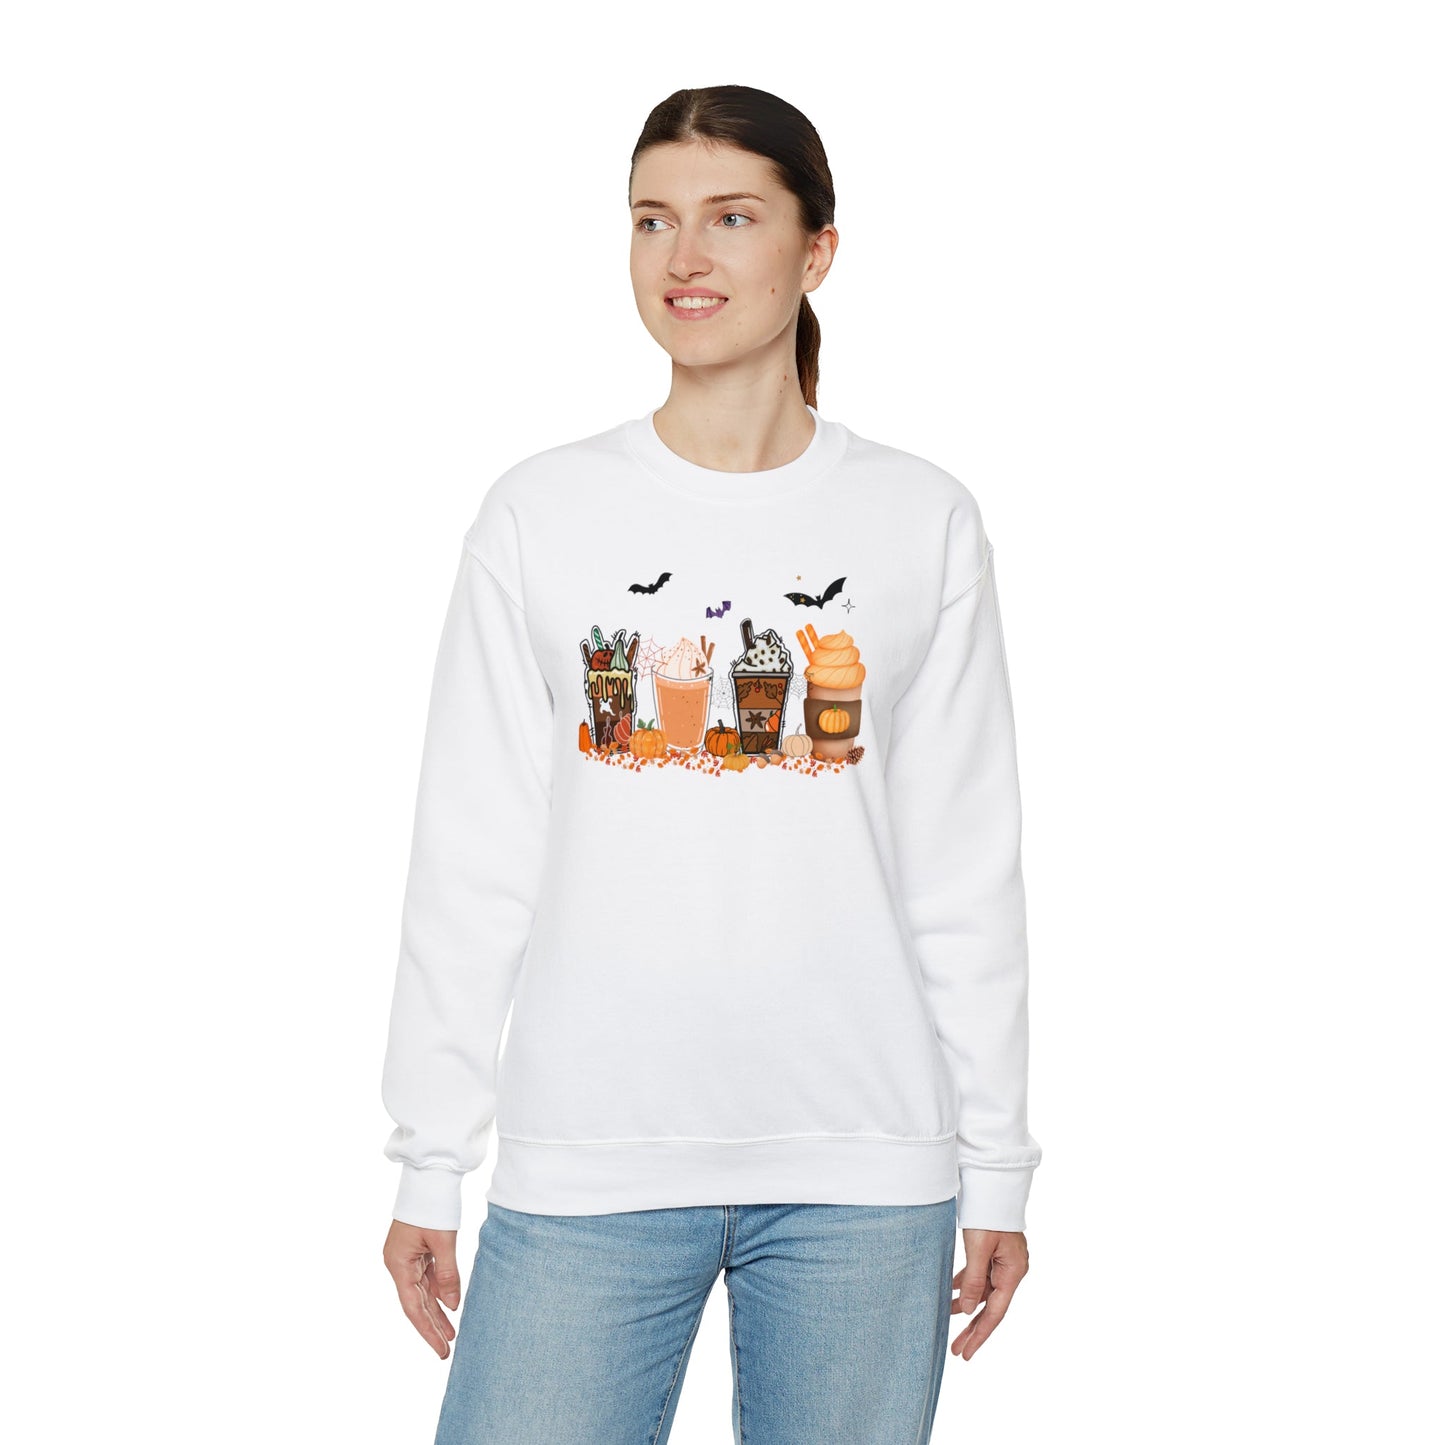 Get trendy with Festive and Spooky Coffee Heavy Blend™ Crewneck Sweatshirt - Sweatshirt available at Good Gift Company. Grab yours for $25.95 today!